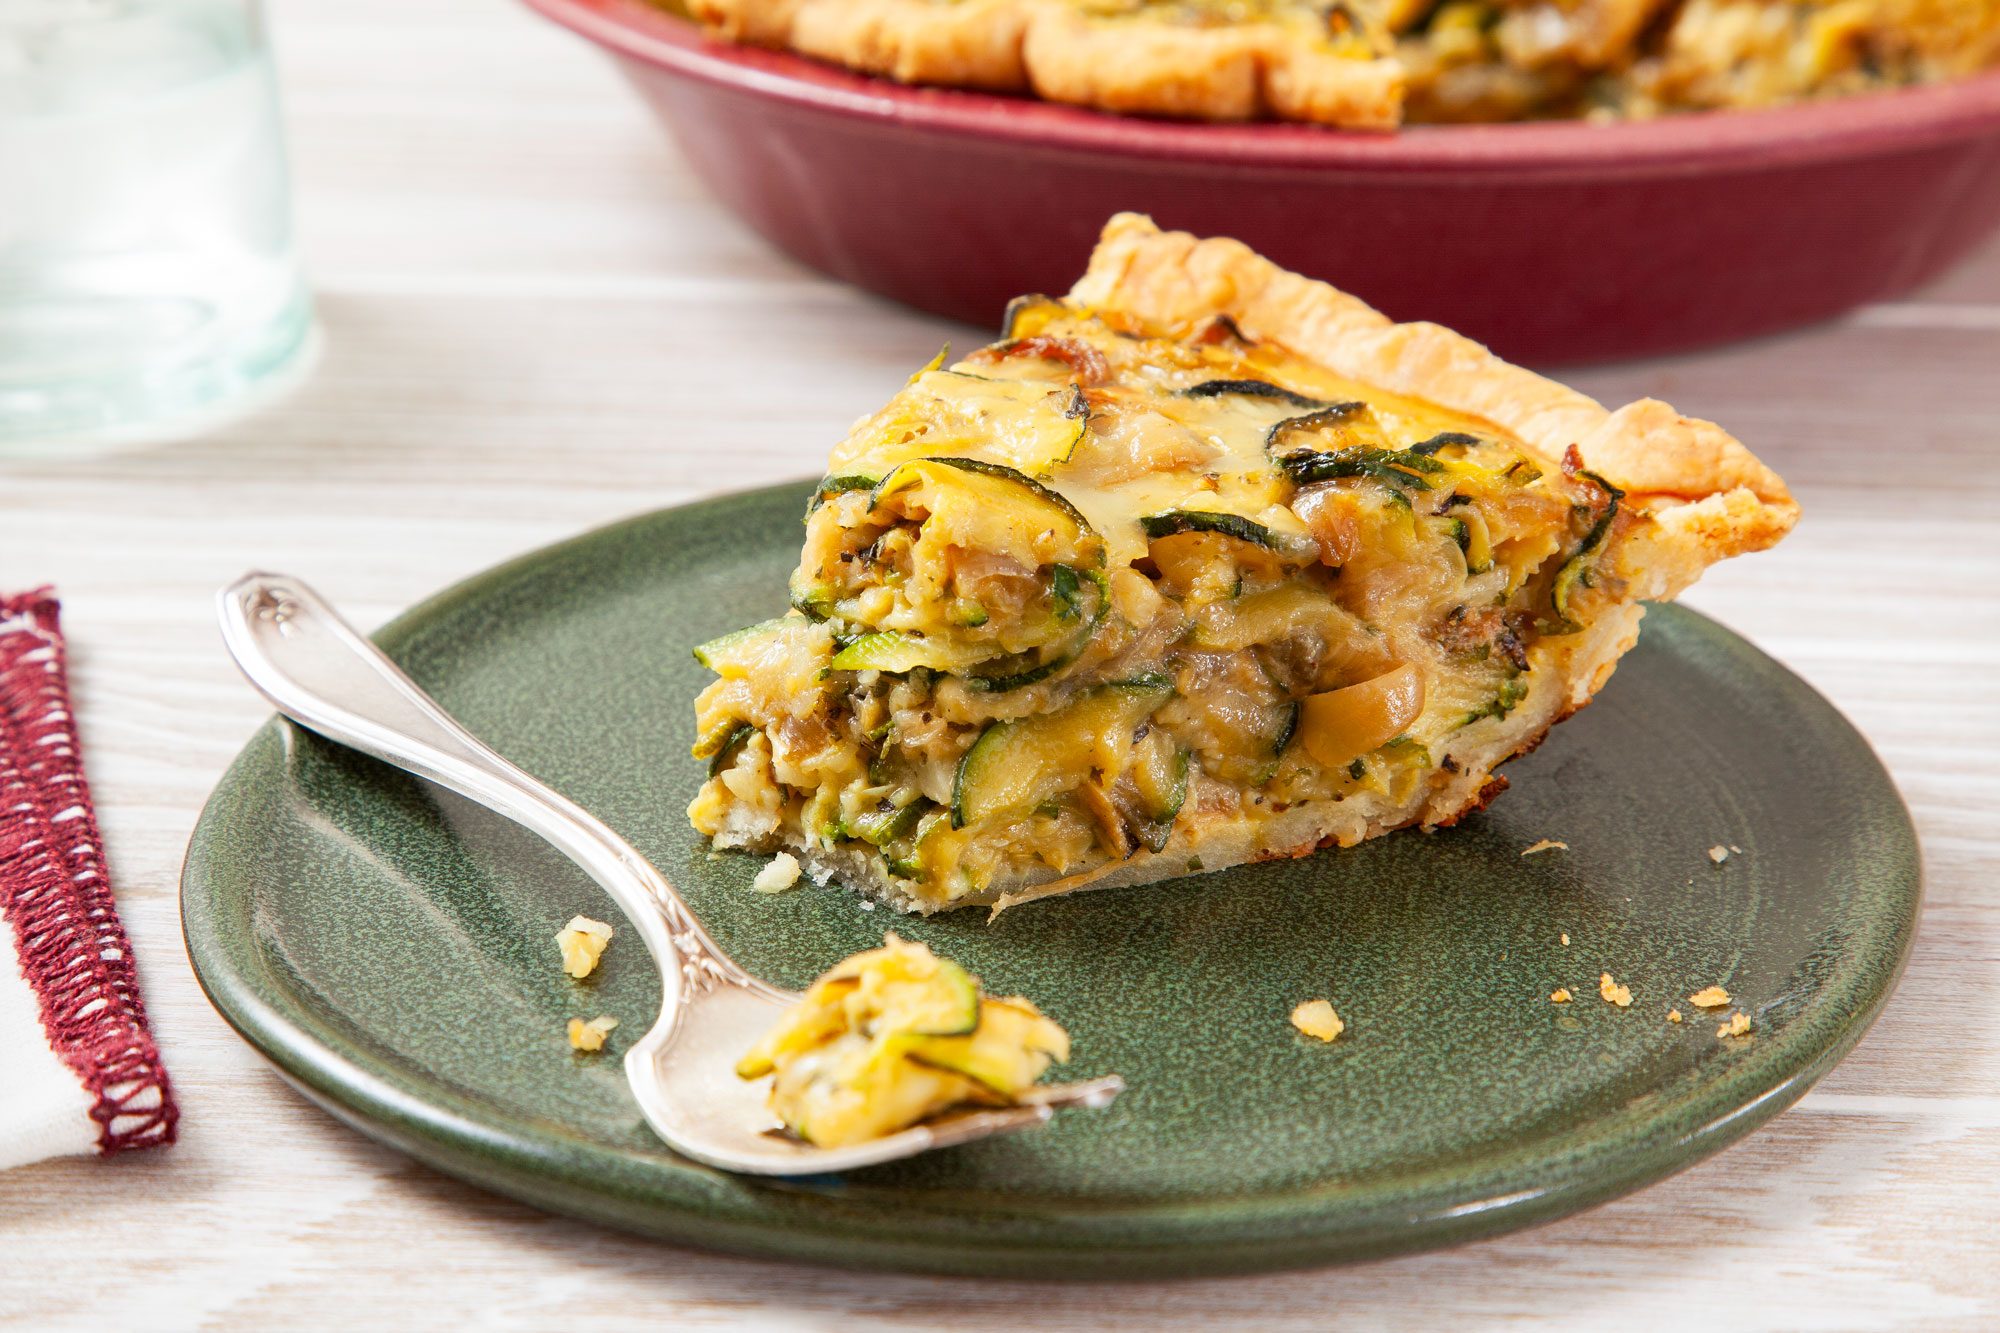 A Slice of Zucchini Quiche with Fork on a Green Ceramic Plate on Wooden Surface